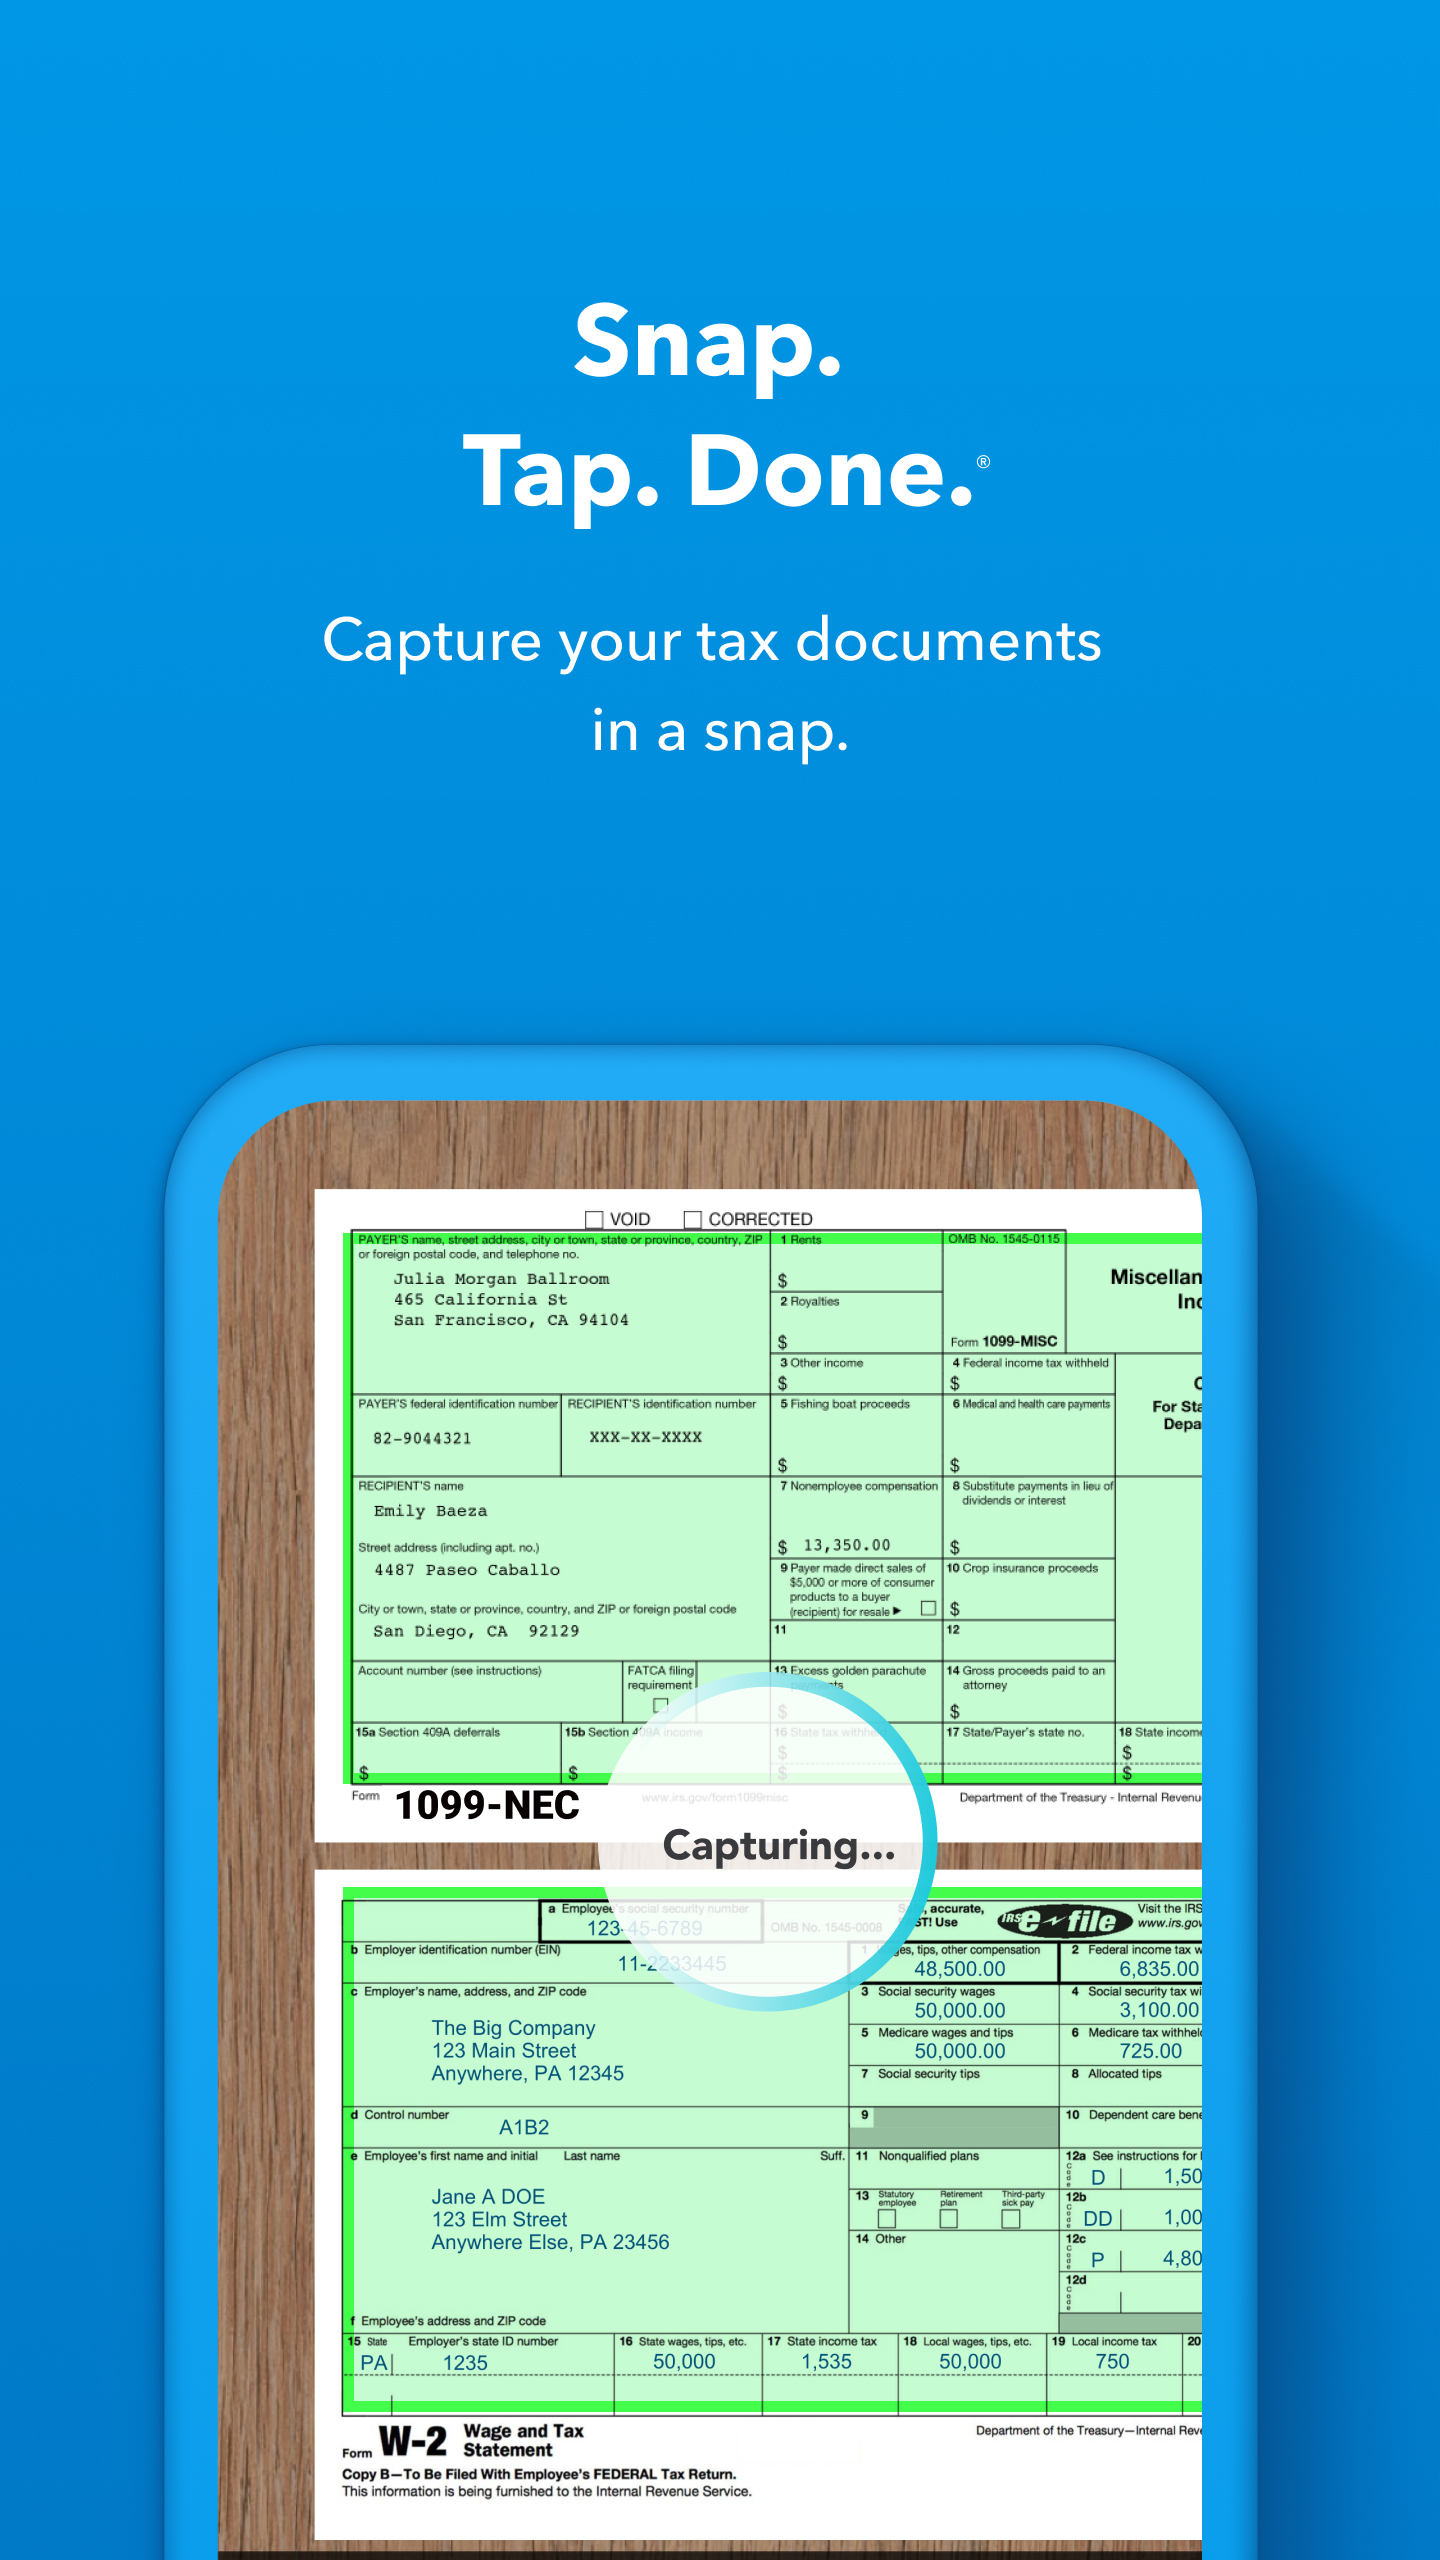 Android application TurboTax: File Your Tax Return screenshort